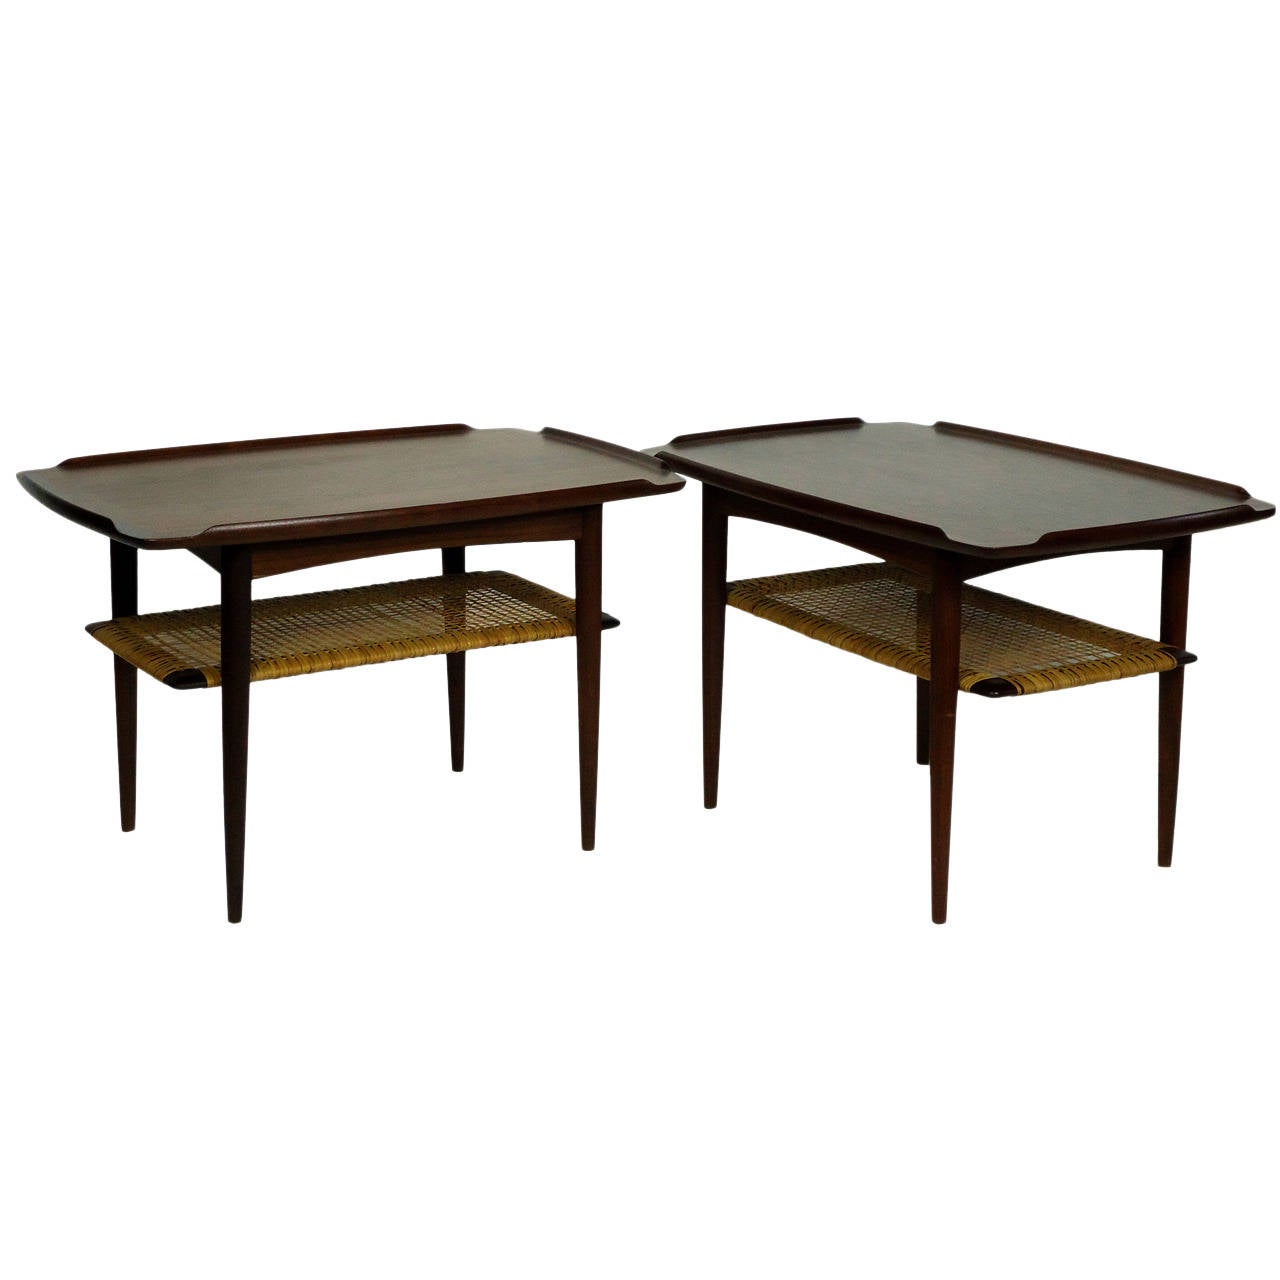 Danish Poul Jensen Selig Matched Pair of End Tables Teak and Cane Denmark 1950's